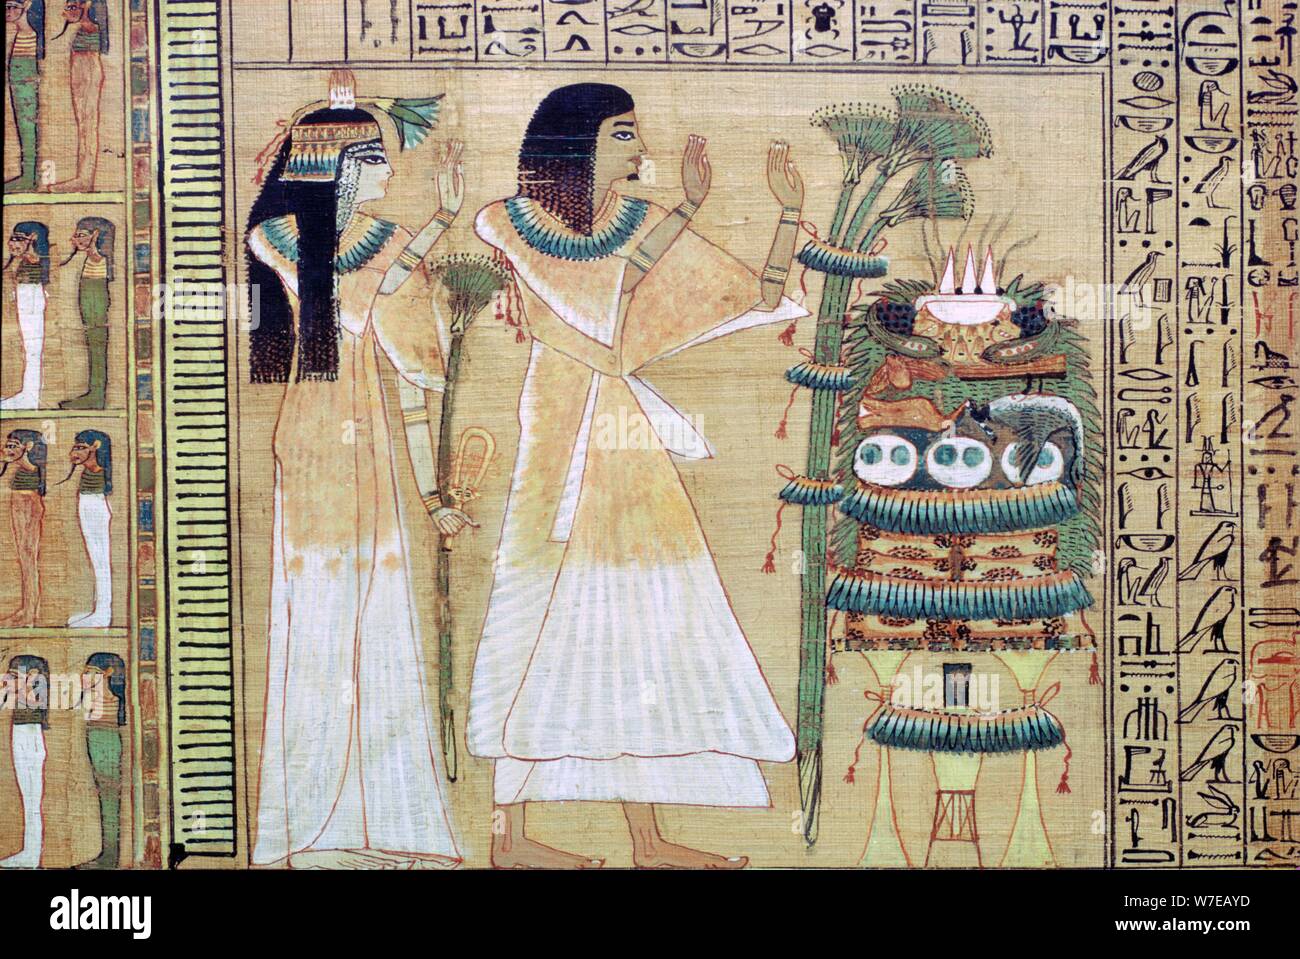 A man and his wife making offerings to Osiris, from the Egyptian Book of the Dead. Artist: Unknown Stock Photo